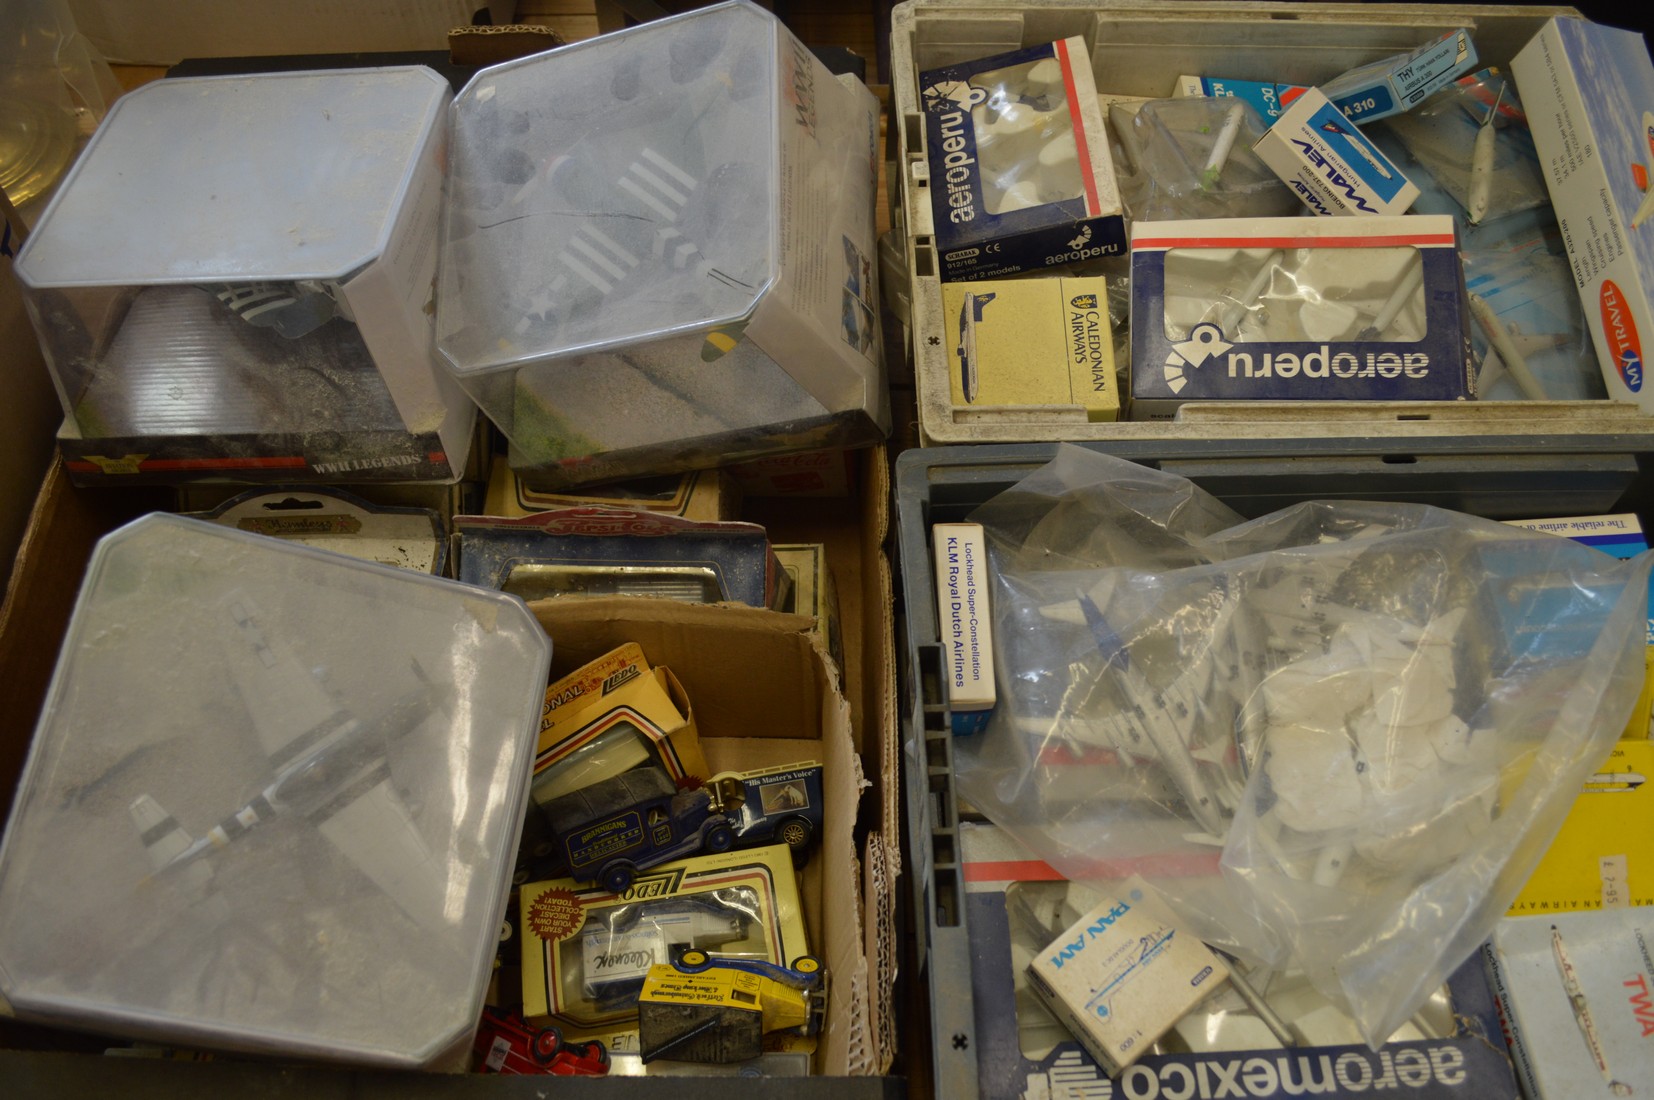 A quantity of model toys, aeroplanes and other items.